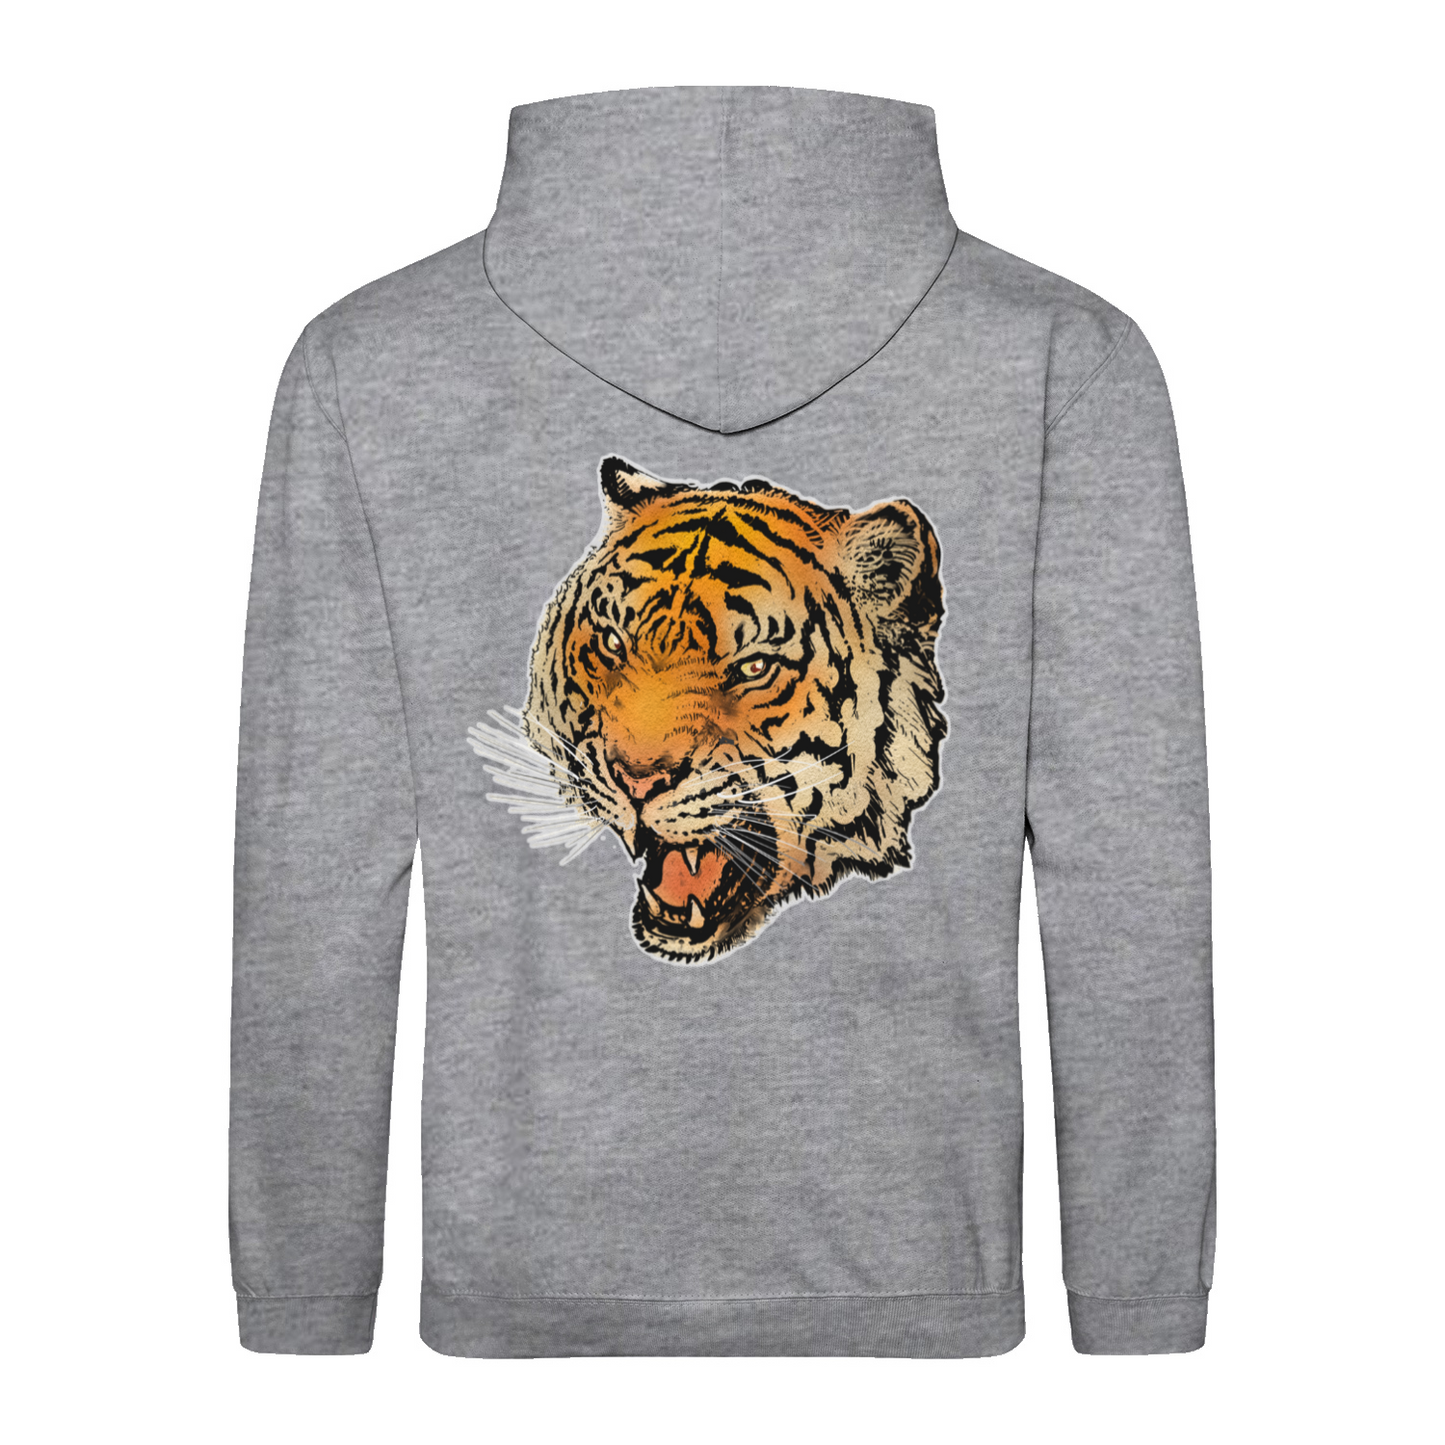 Hoodie "Angry Tiger Face"